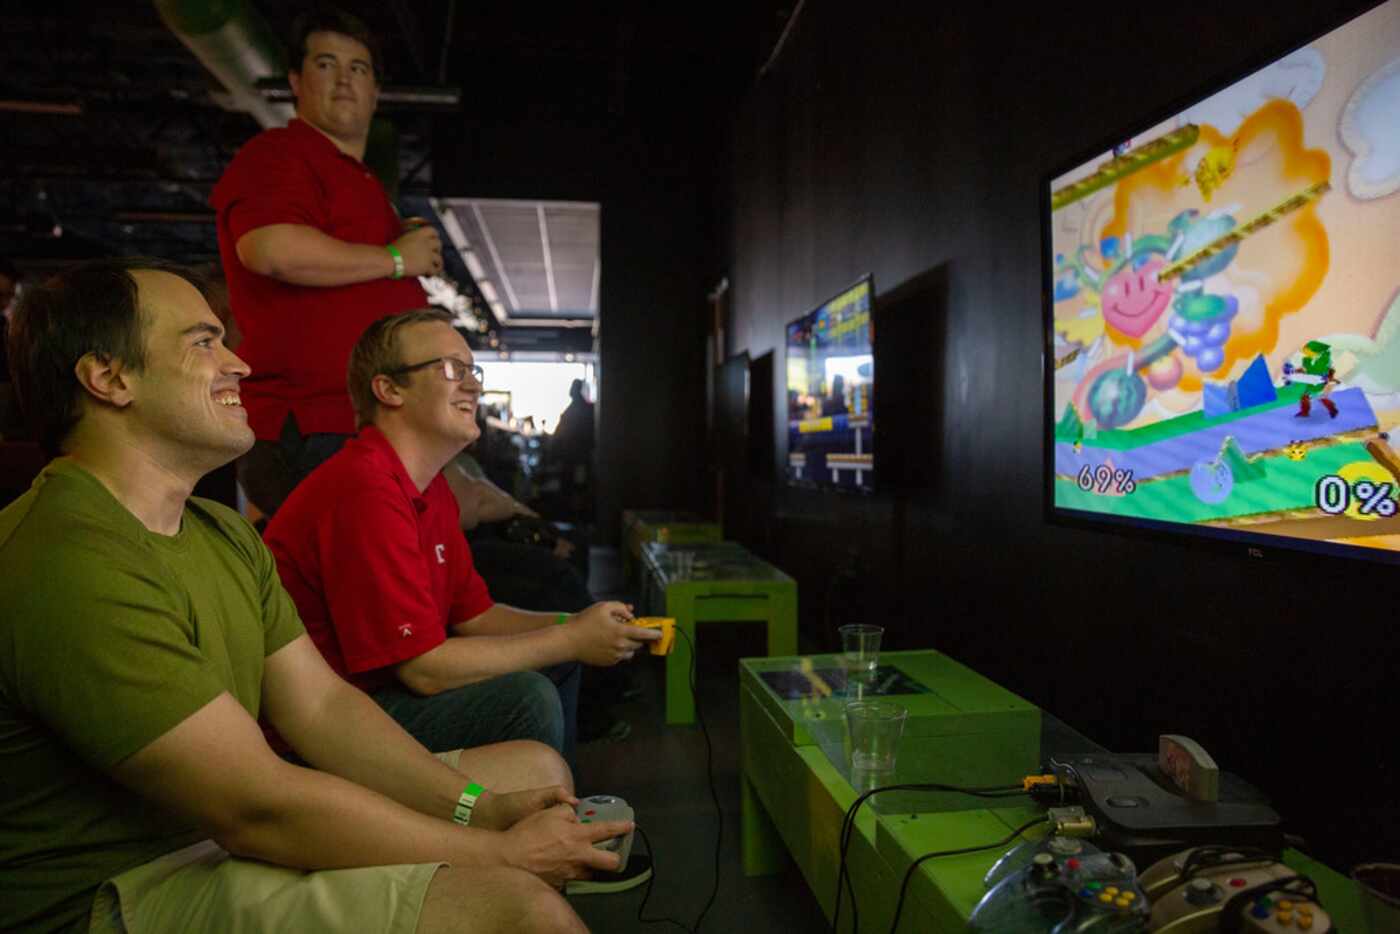 Friends Jon Goodwin (left) and Shaun Hands (middle) play Super Smash Bros. on Nintendo 64 at...